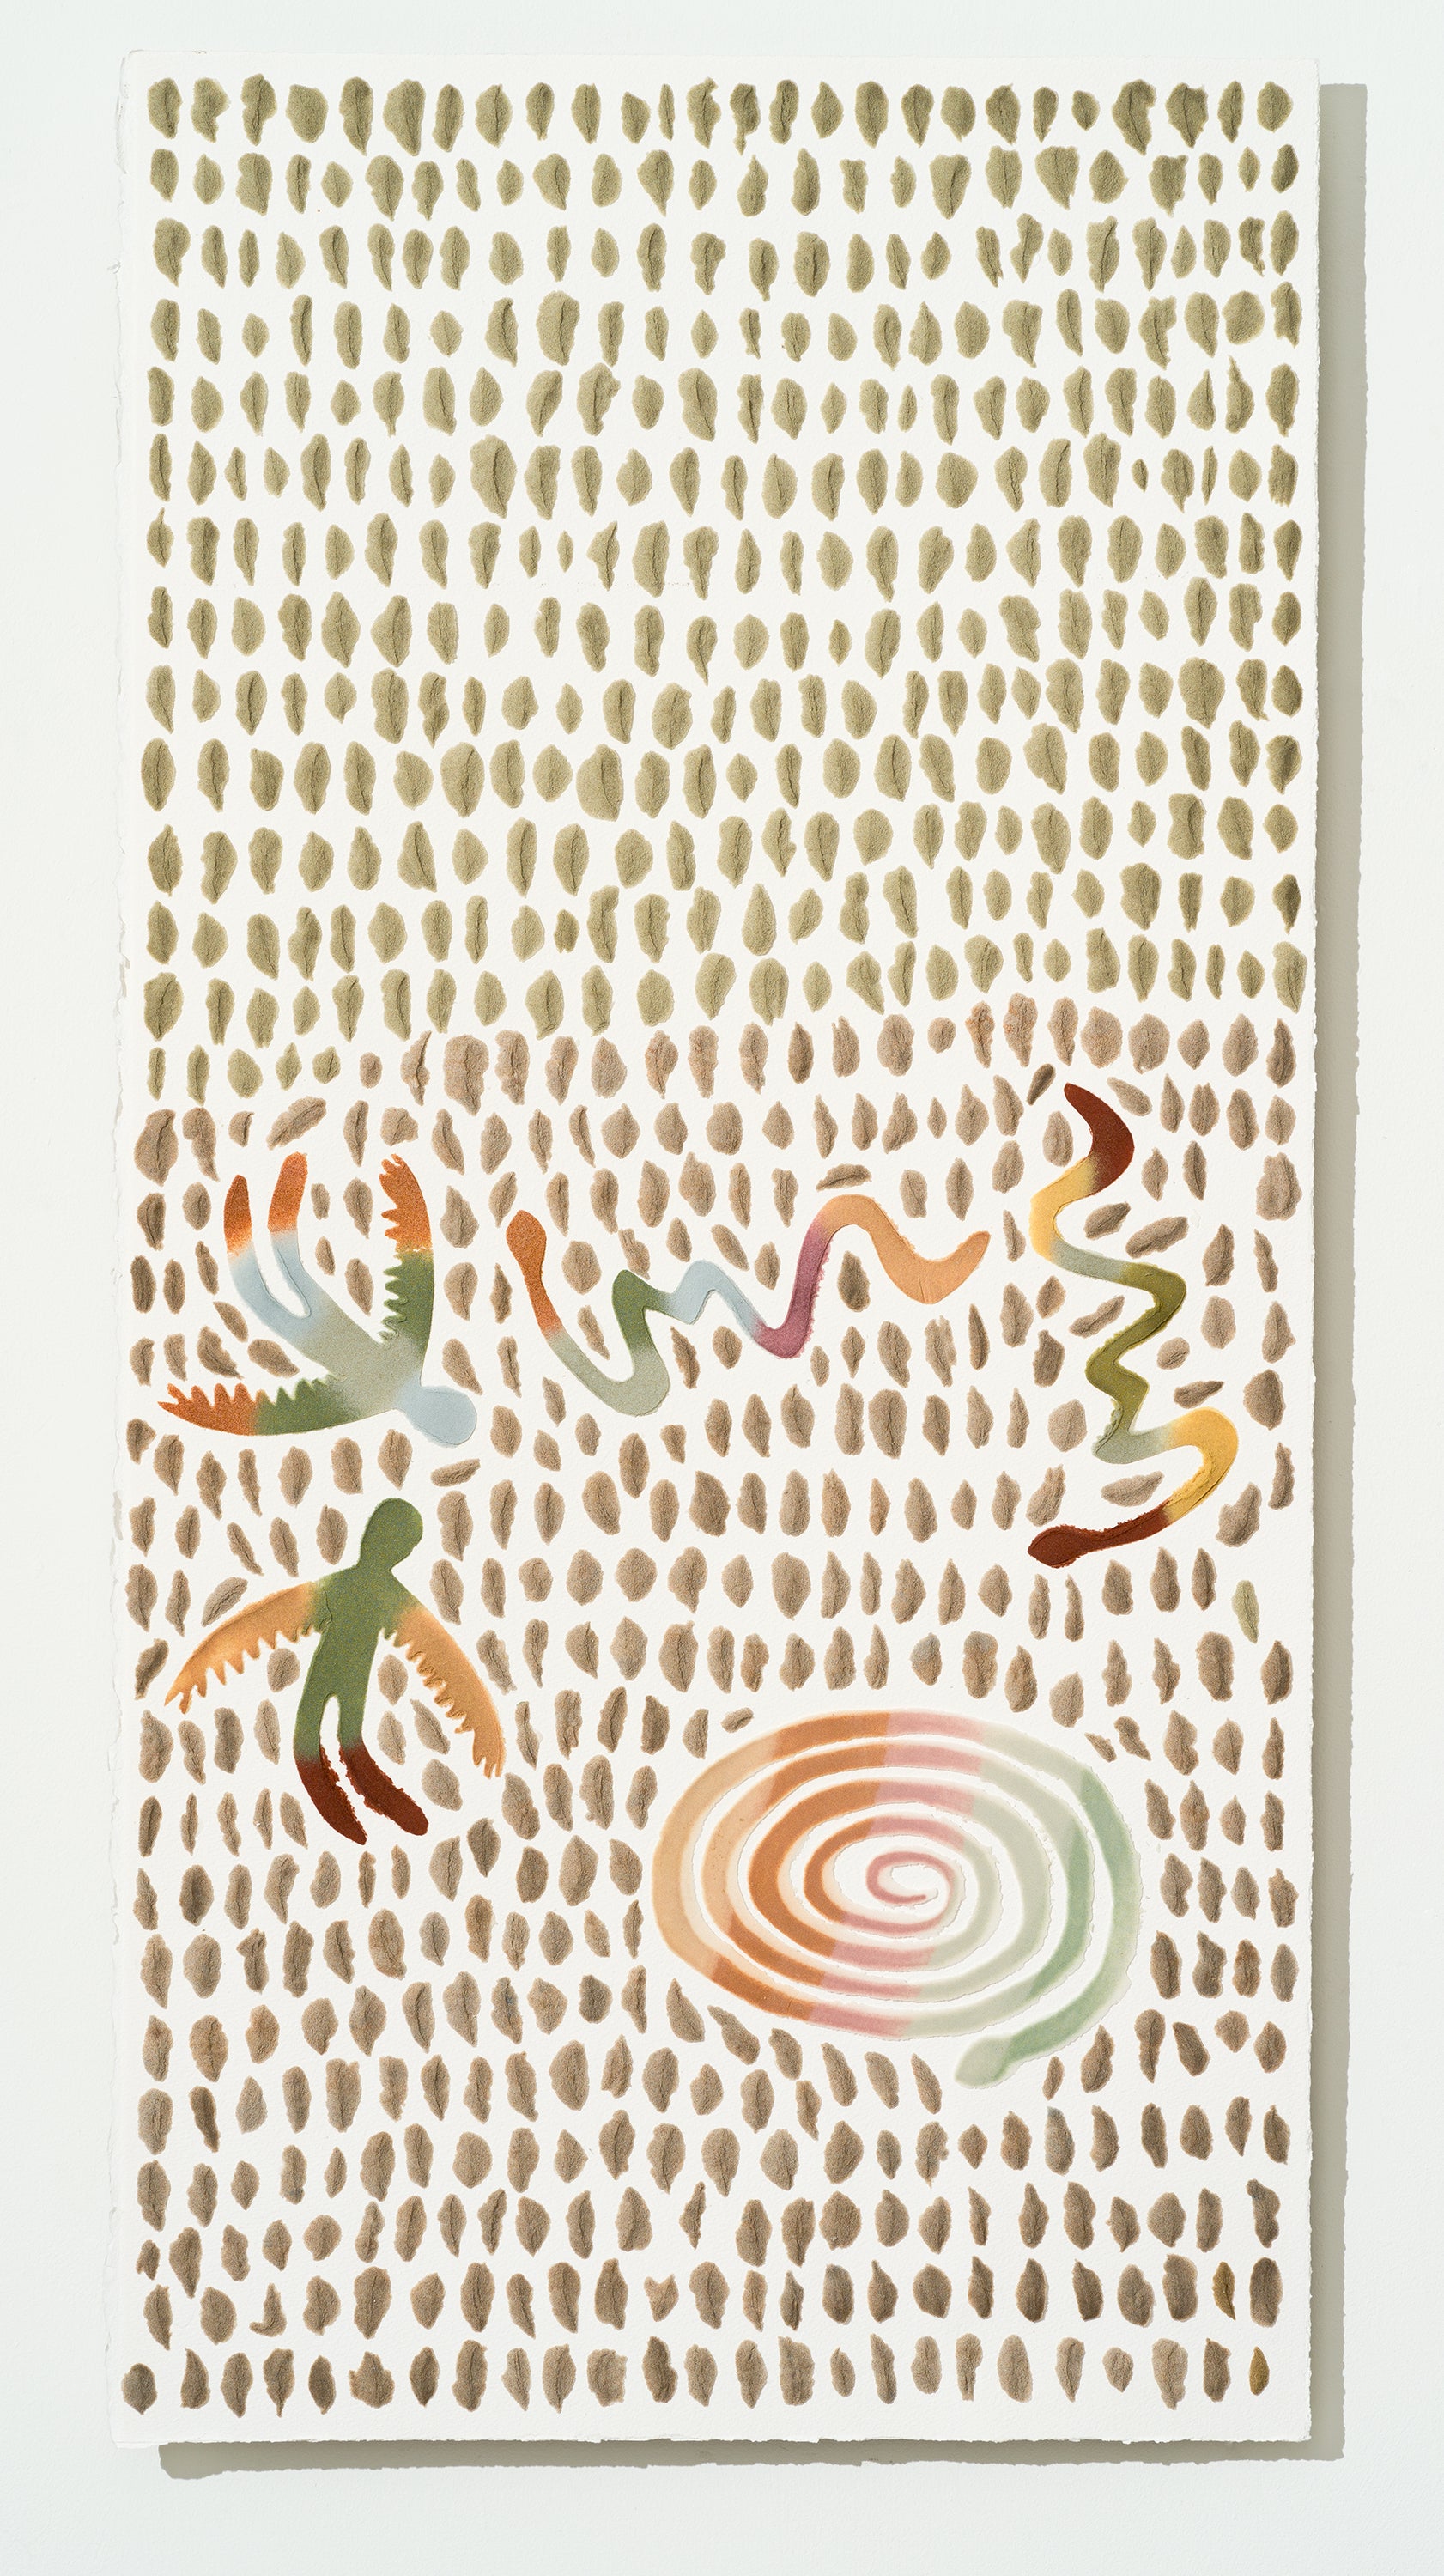 Dream 2 2023 kiln-fired glass on Arches paper, mounted on wood board 48 x 24 in.